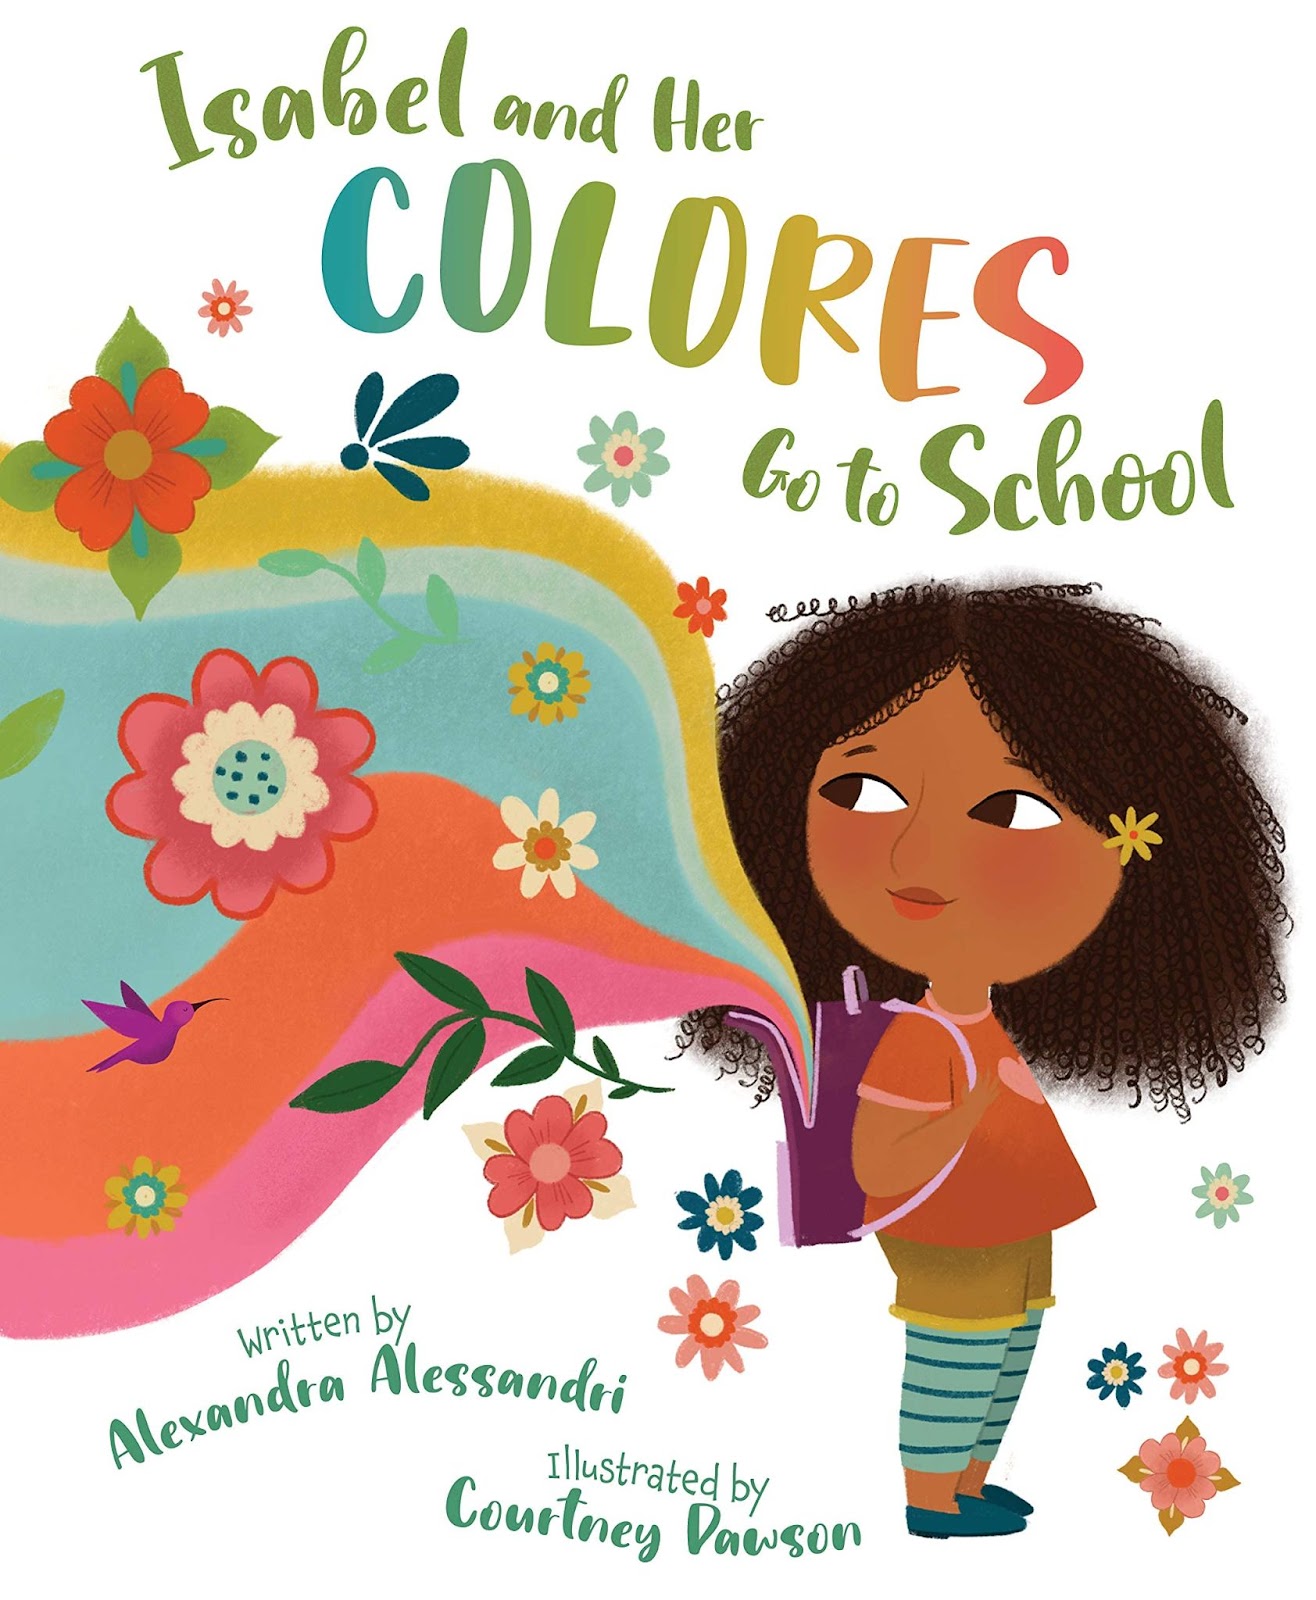 Isabel and Her Colores Go to School (English and Spanish Edition) by Alexandra Alessandri